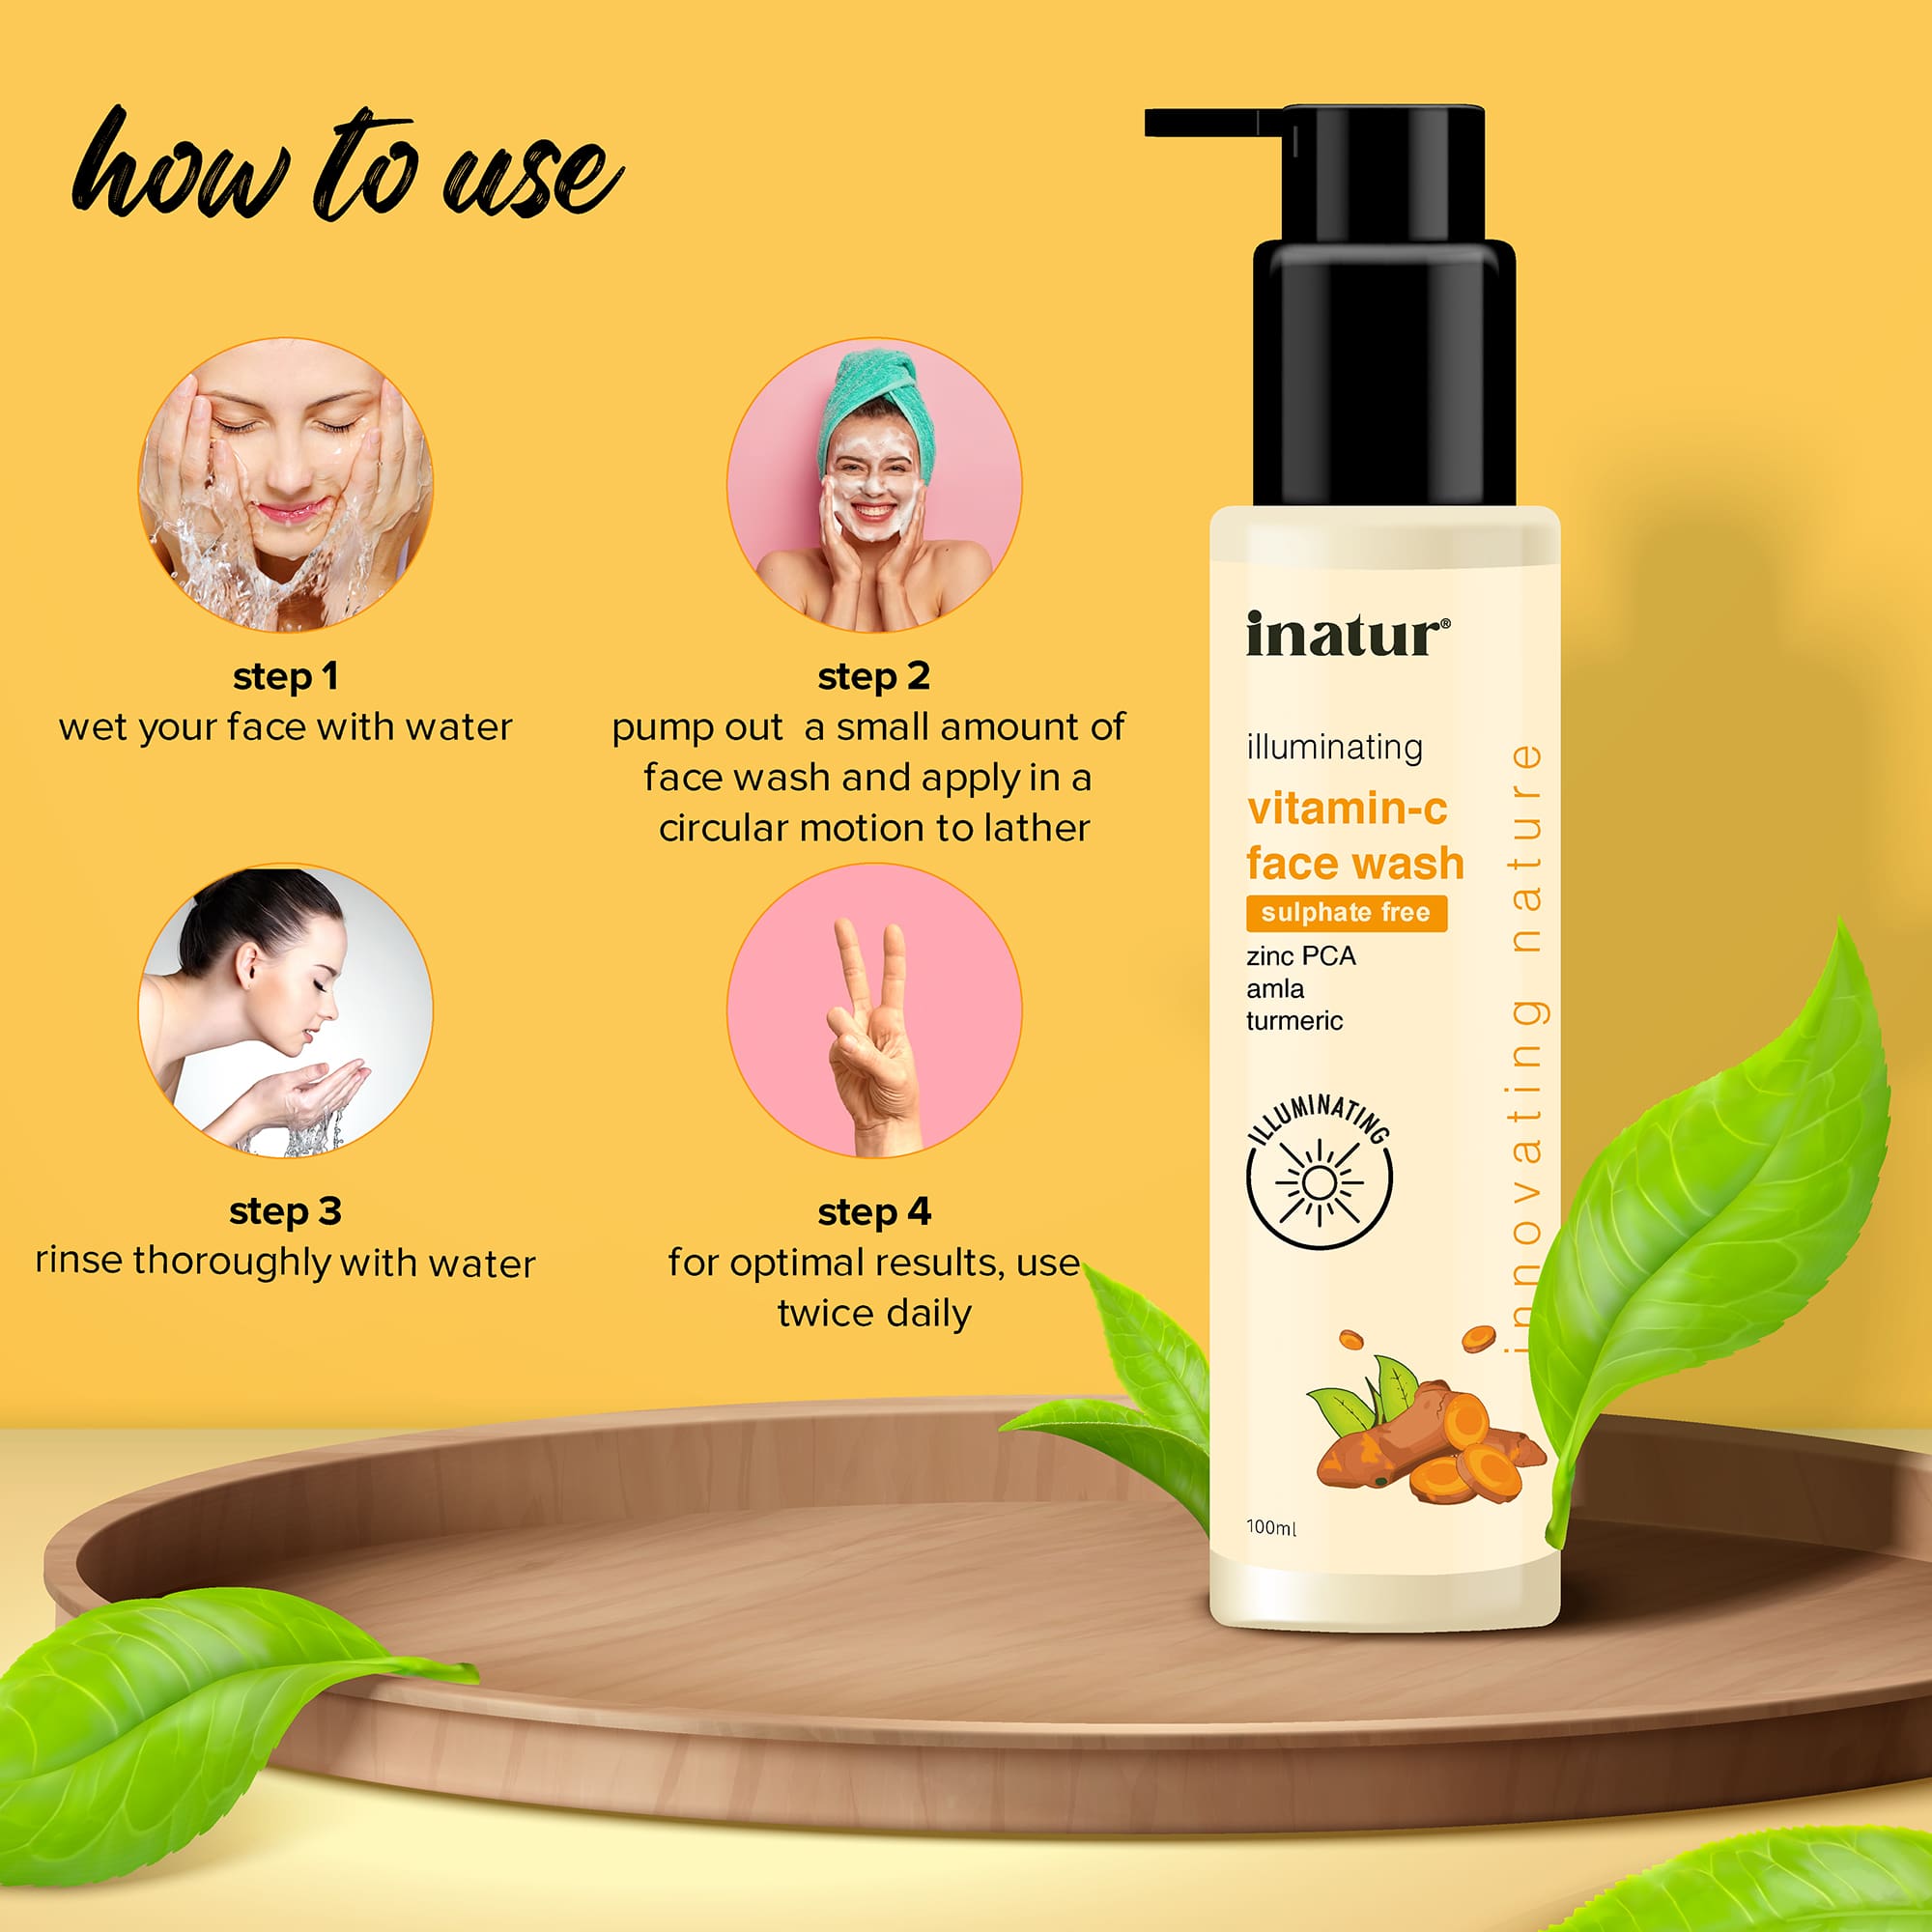 how to use inatur vitamin c face wash 100ml